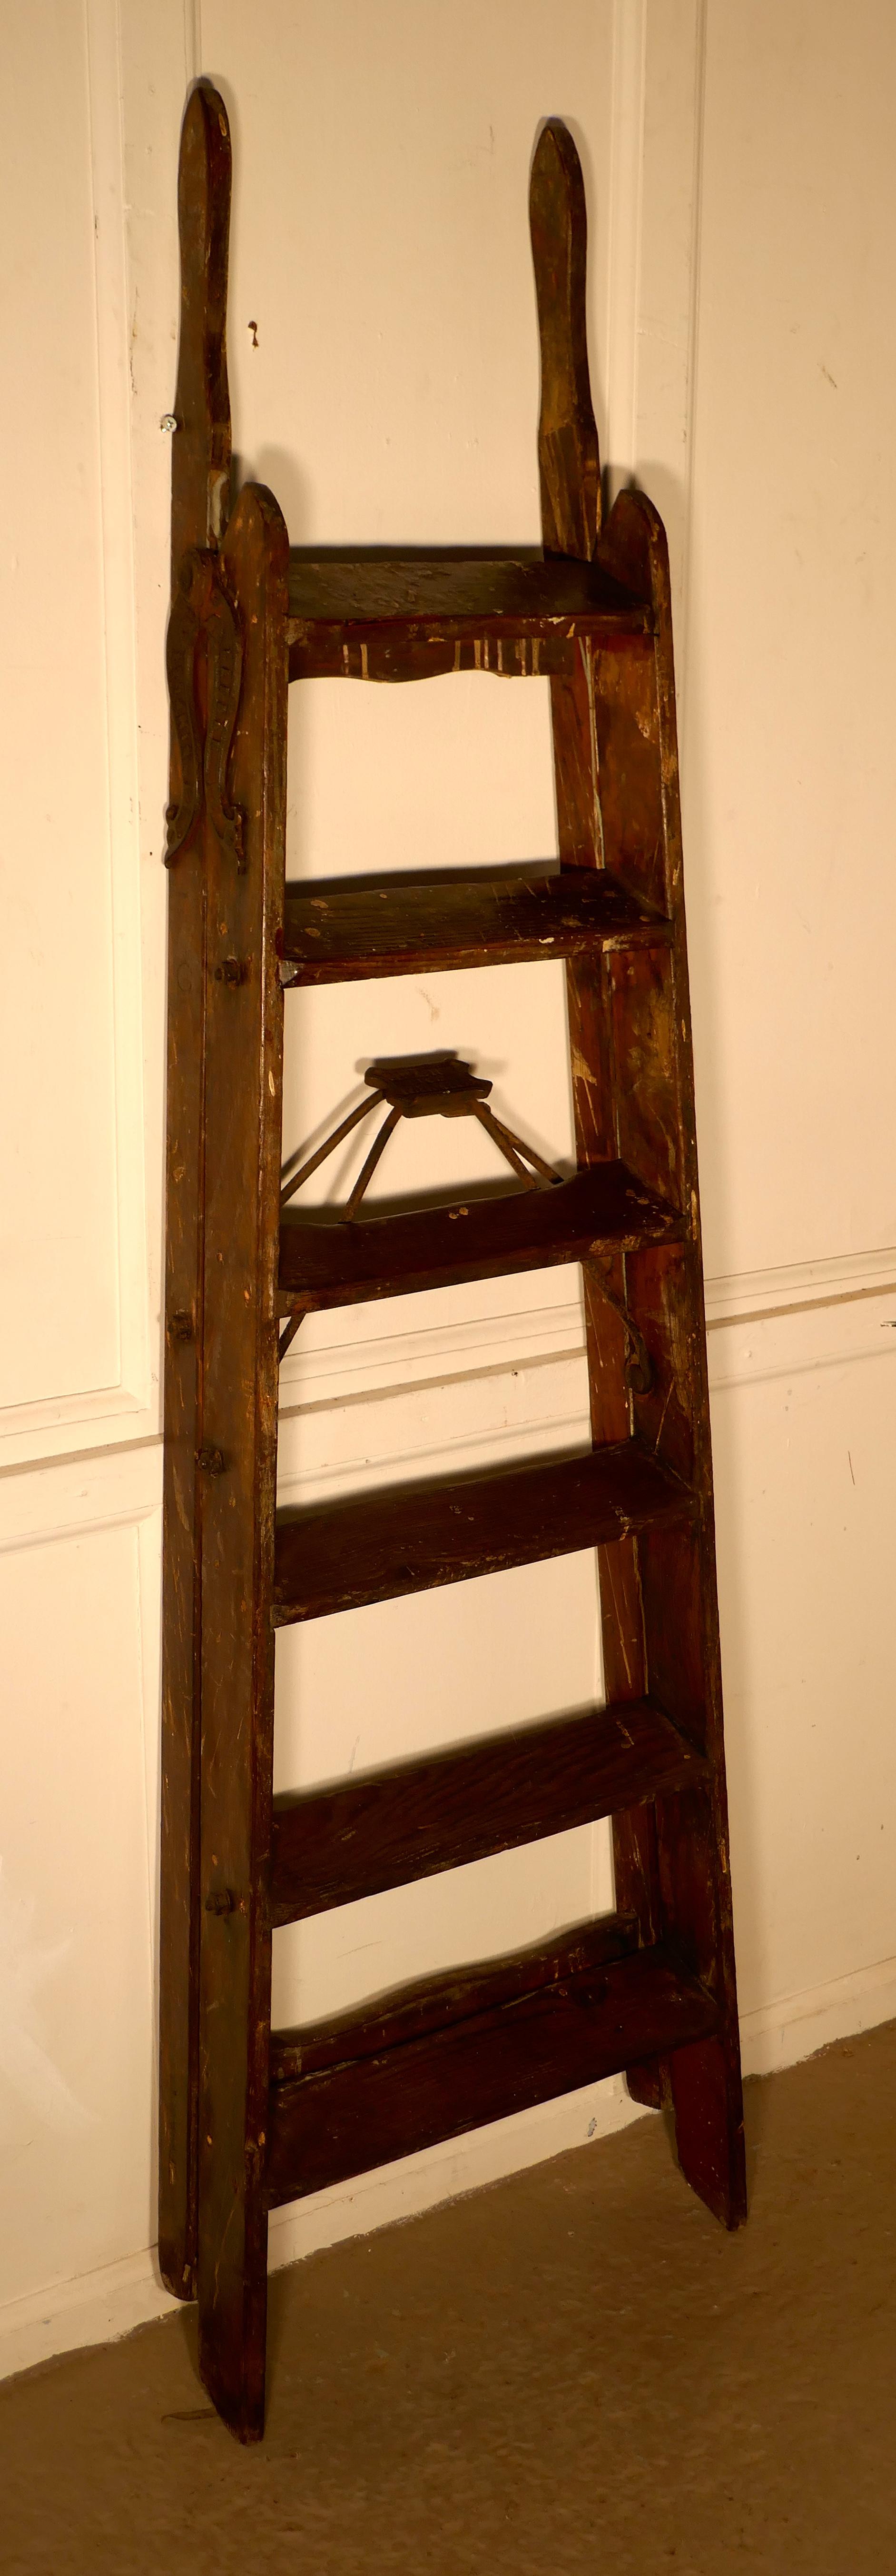 Paint splattered simplex safety step ladder

This is a very useful and marvelous looking piece, the step ladder has 2 good long upright grab handles, it has a the Simplex snap action making it very sturdy and stop any chance of collapse just by